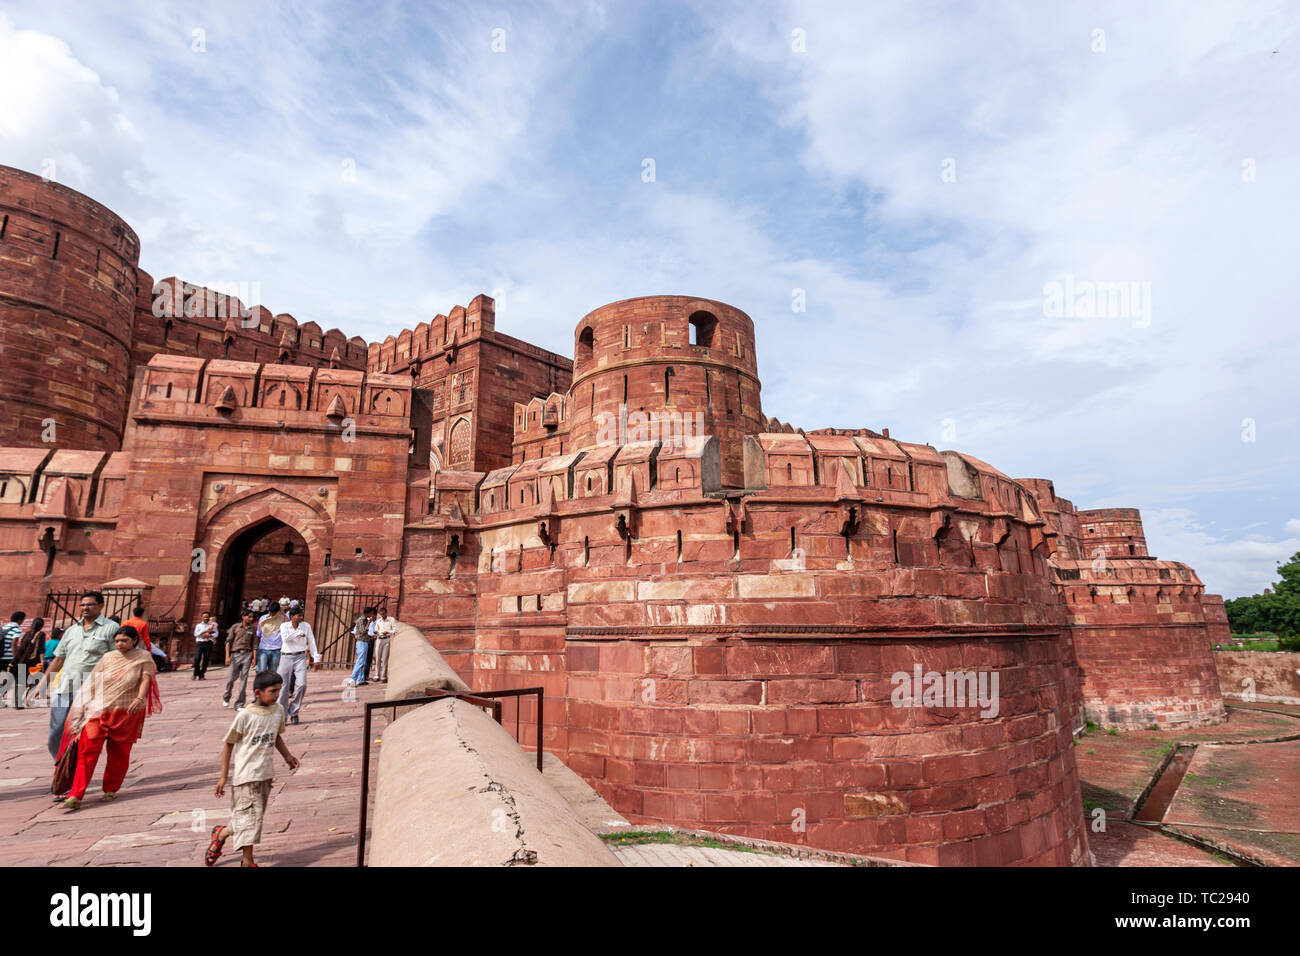 Amar Singh Gate of the Agra Fort with tourists, Agra, Uttar Pradesh, North India Stock Photo